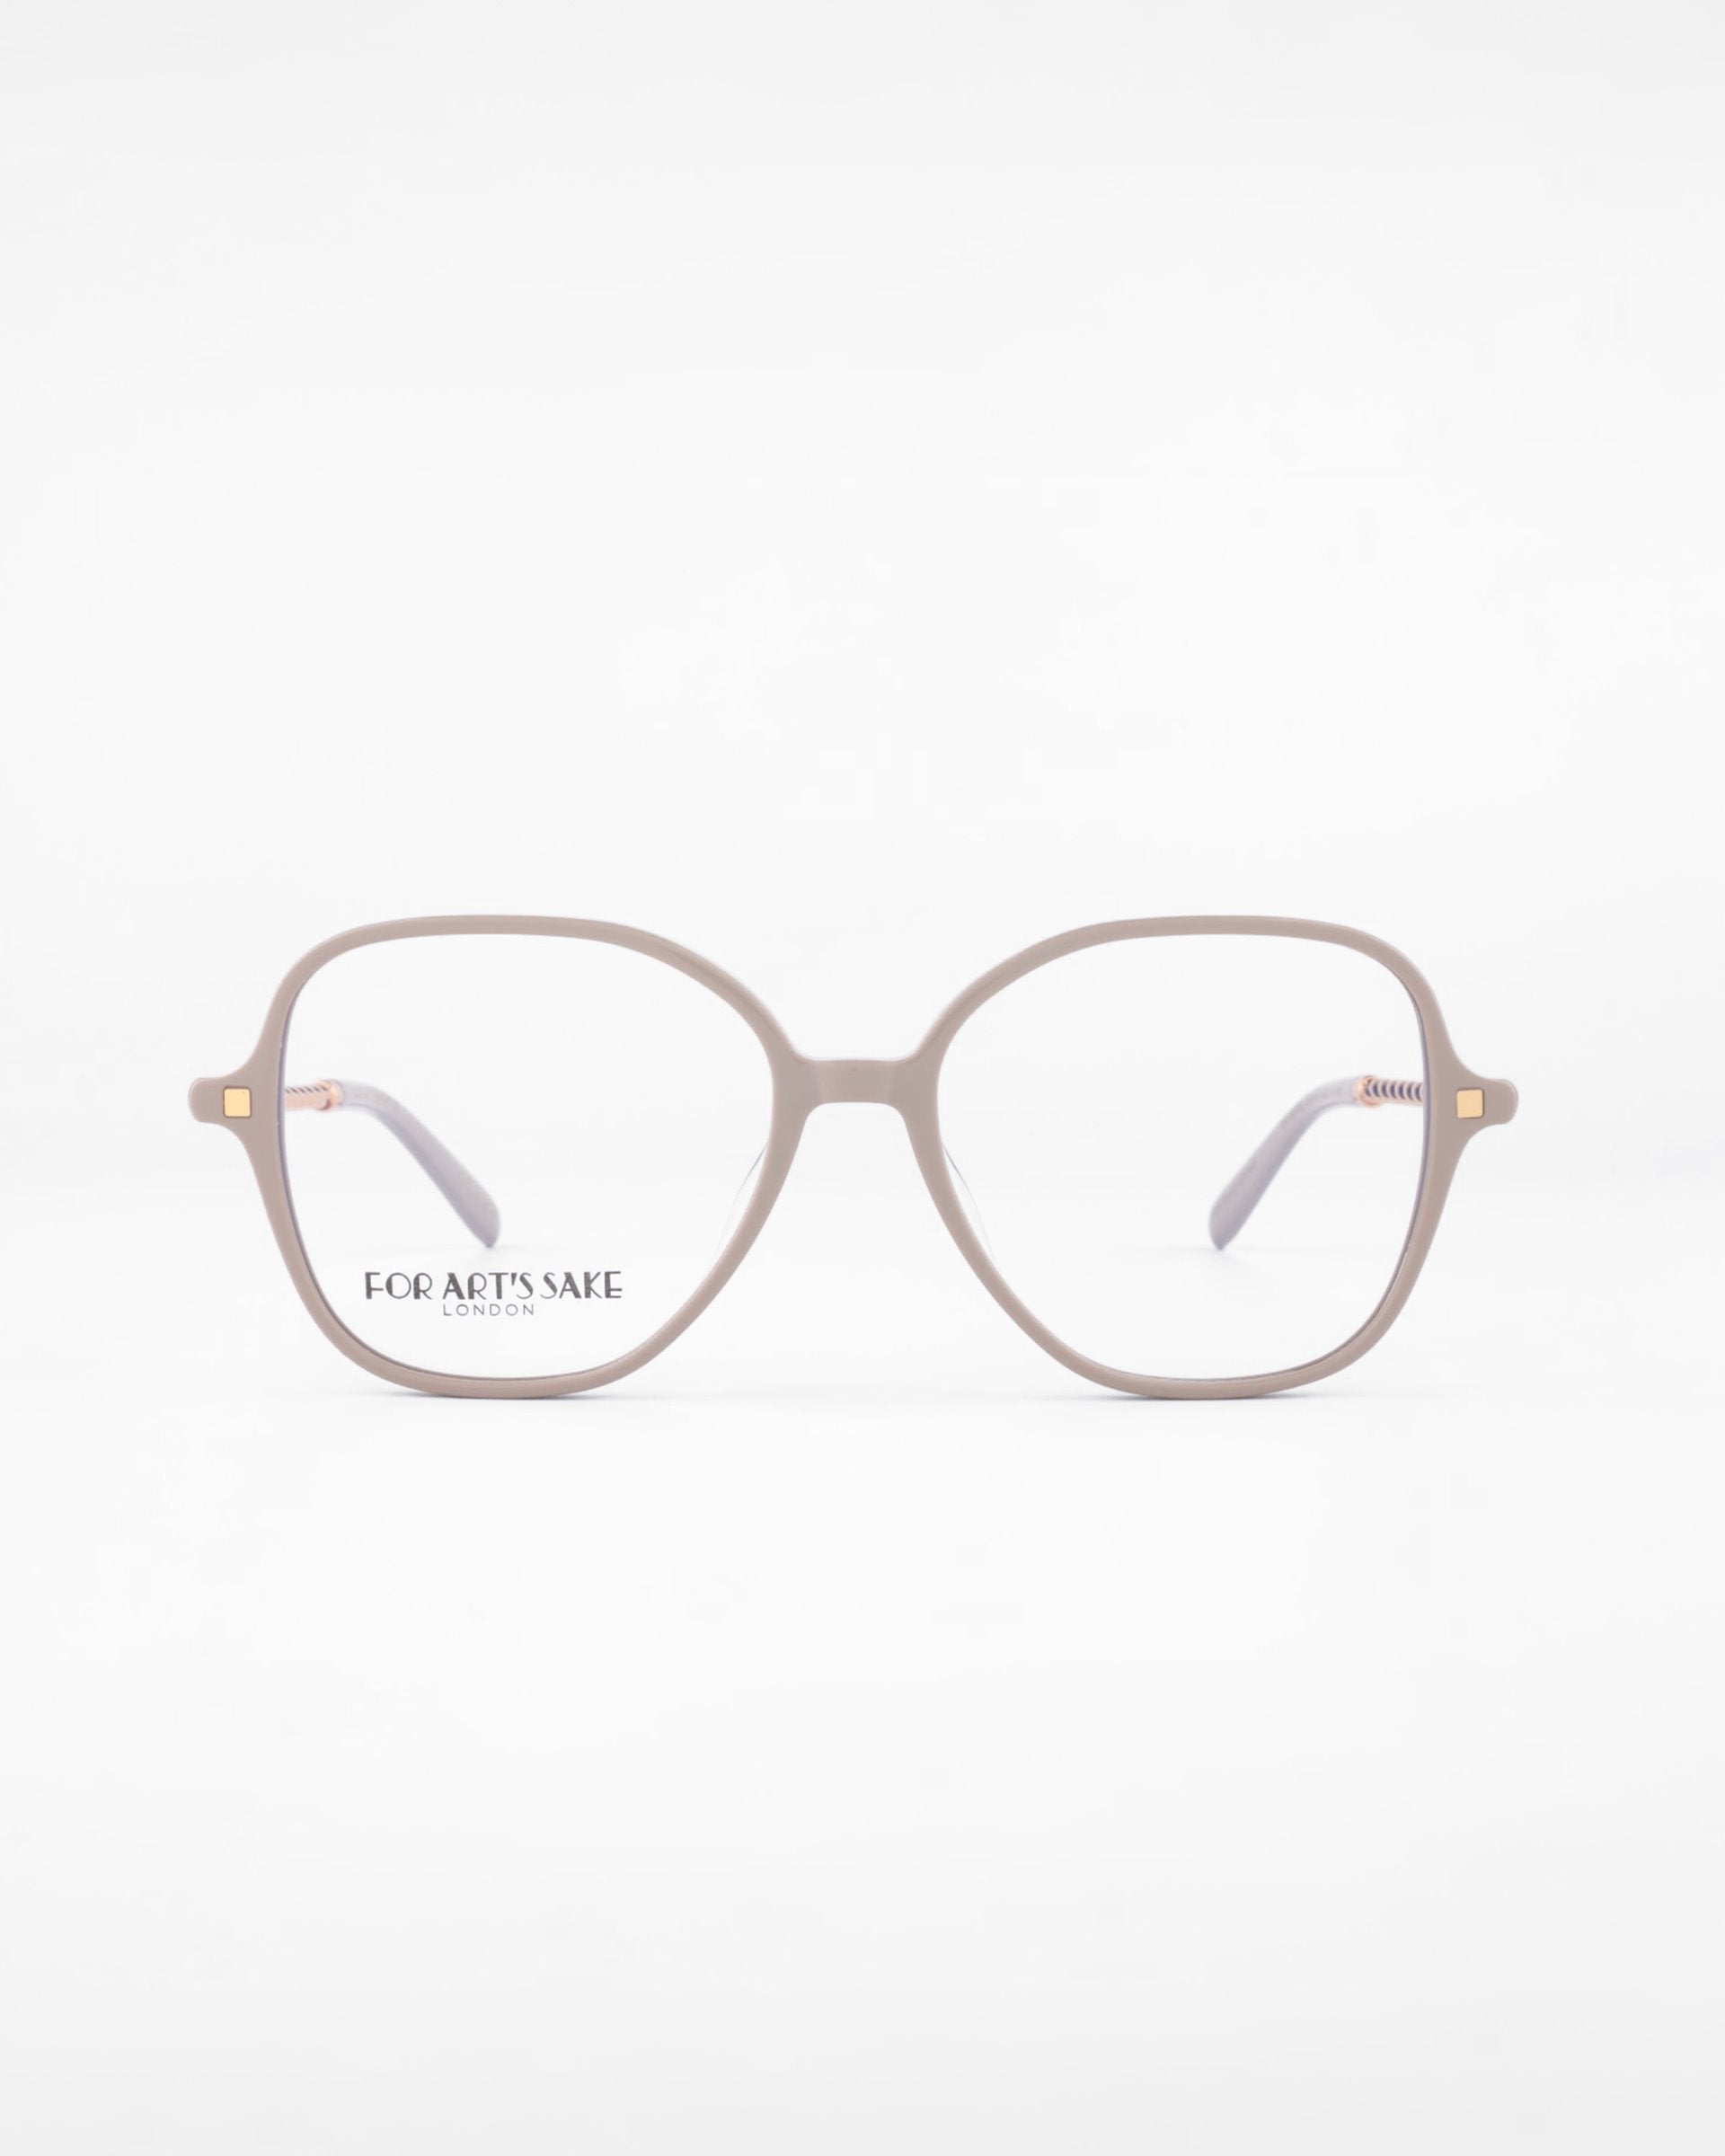 A pair of light grey, oversized eyeglasses with clear lenses set against a white background. These minimalistic eyewear pieces from &quot;For Art&#39;s Sake®&quot; feature the brand name on the left lens and temples in a darker grey shade. They come equipped with blue light filter technology for added comfort.